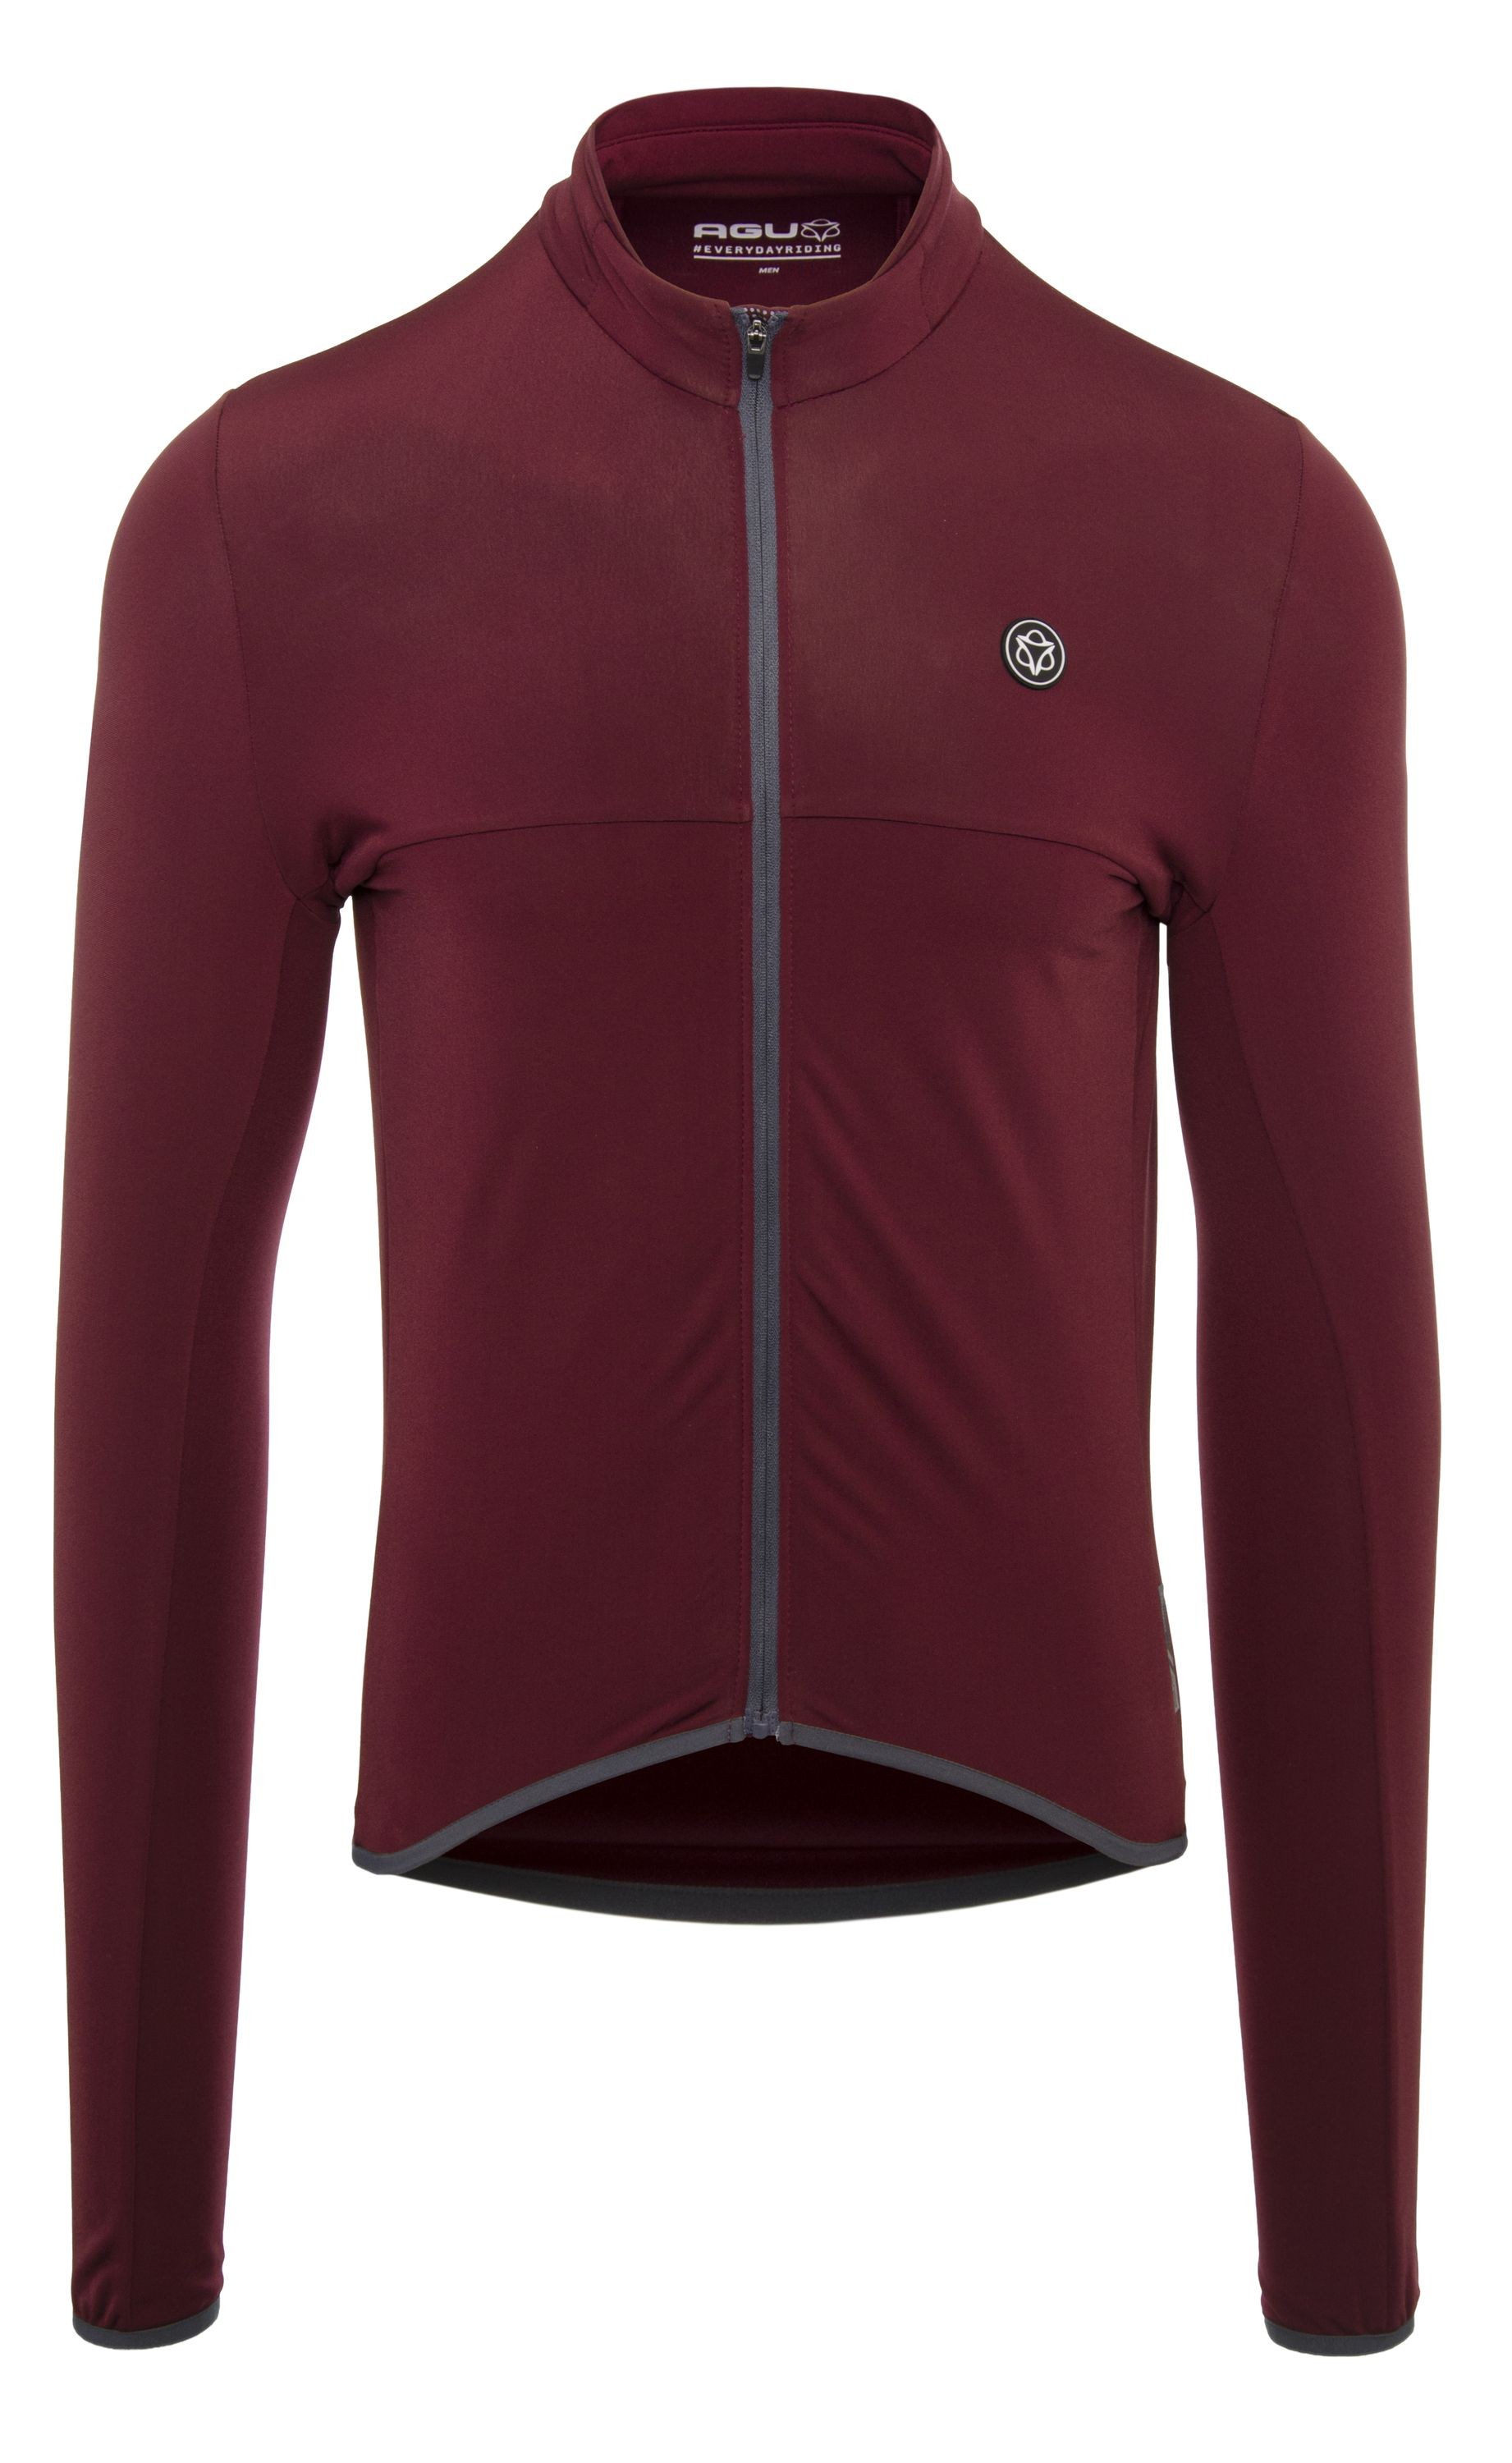 Agu essential thermo maillot de cyclisme manches longues windsor wine rouge